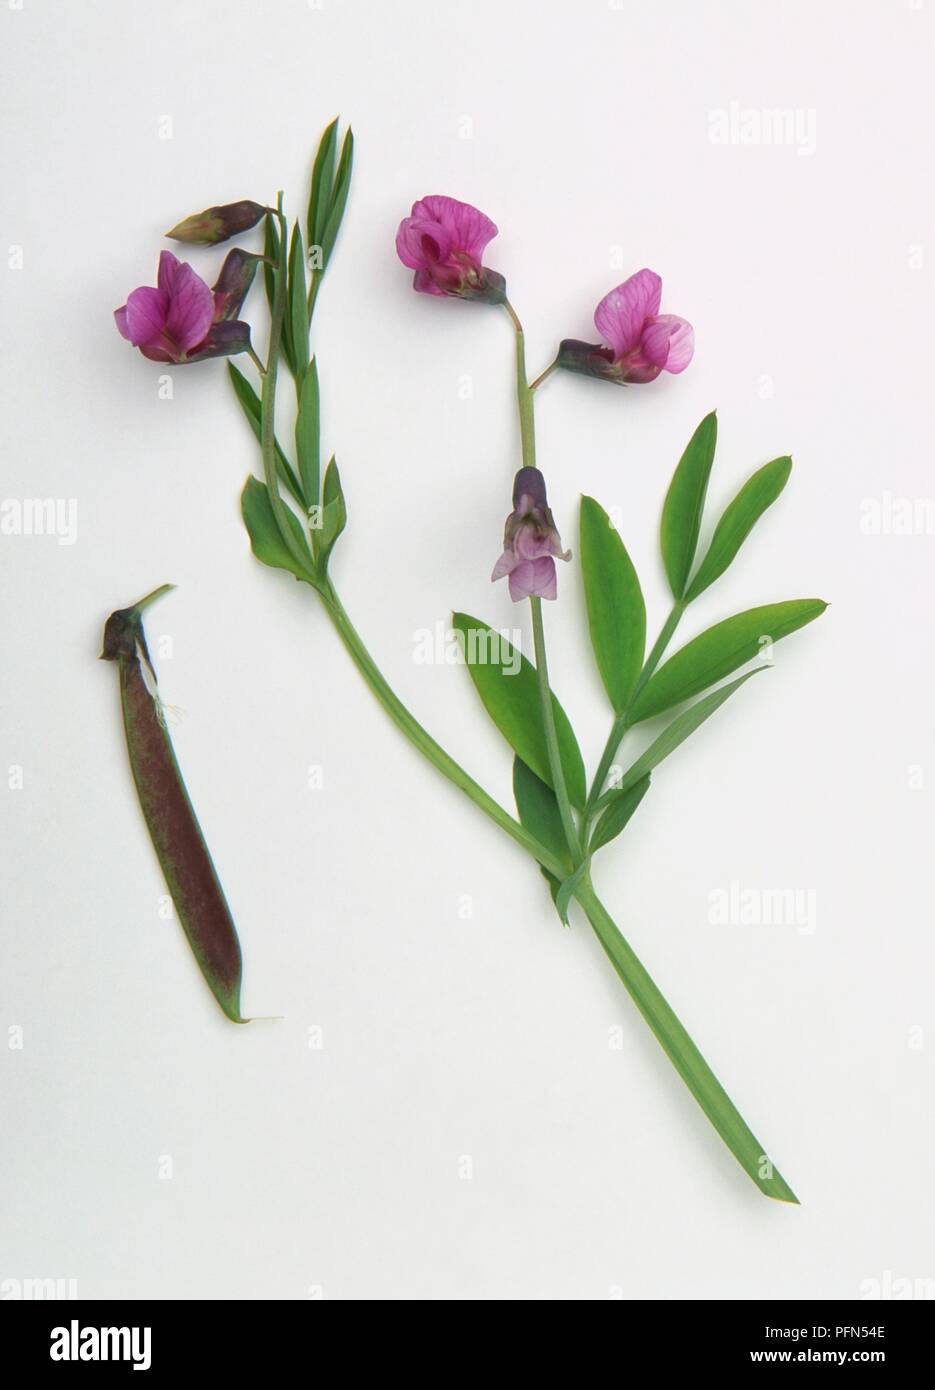 Lathyrus linifolius var montanus (Bitter vetch), stem with leaves and pink flowers, and separate fruit-pod Stock Photo